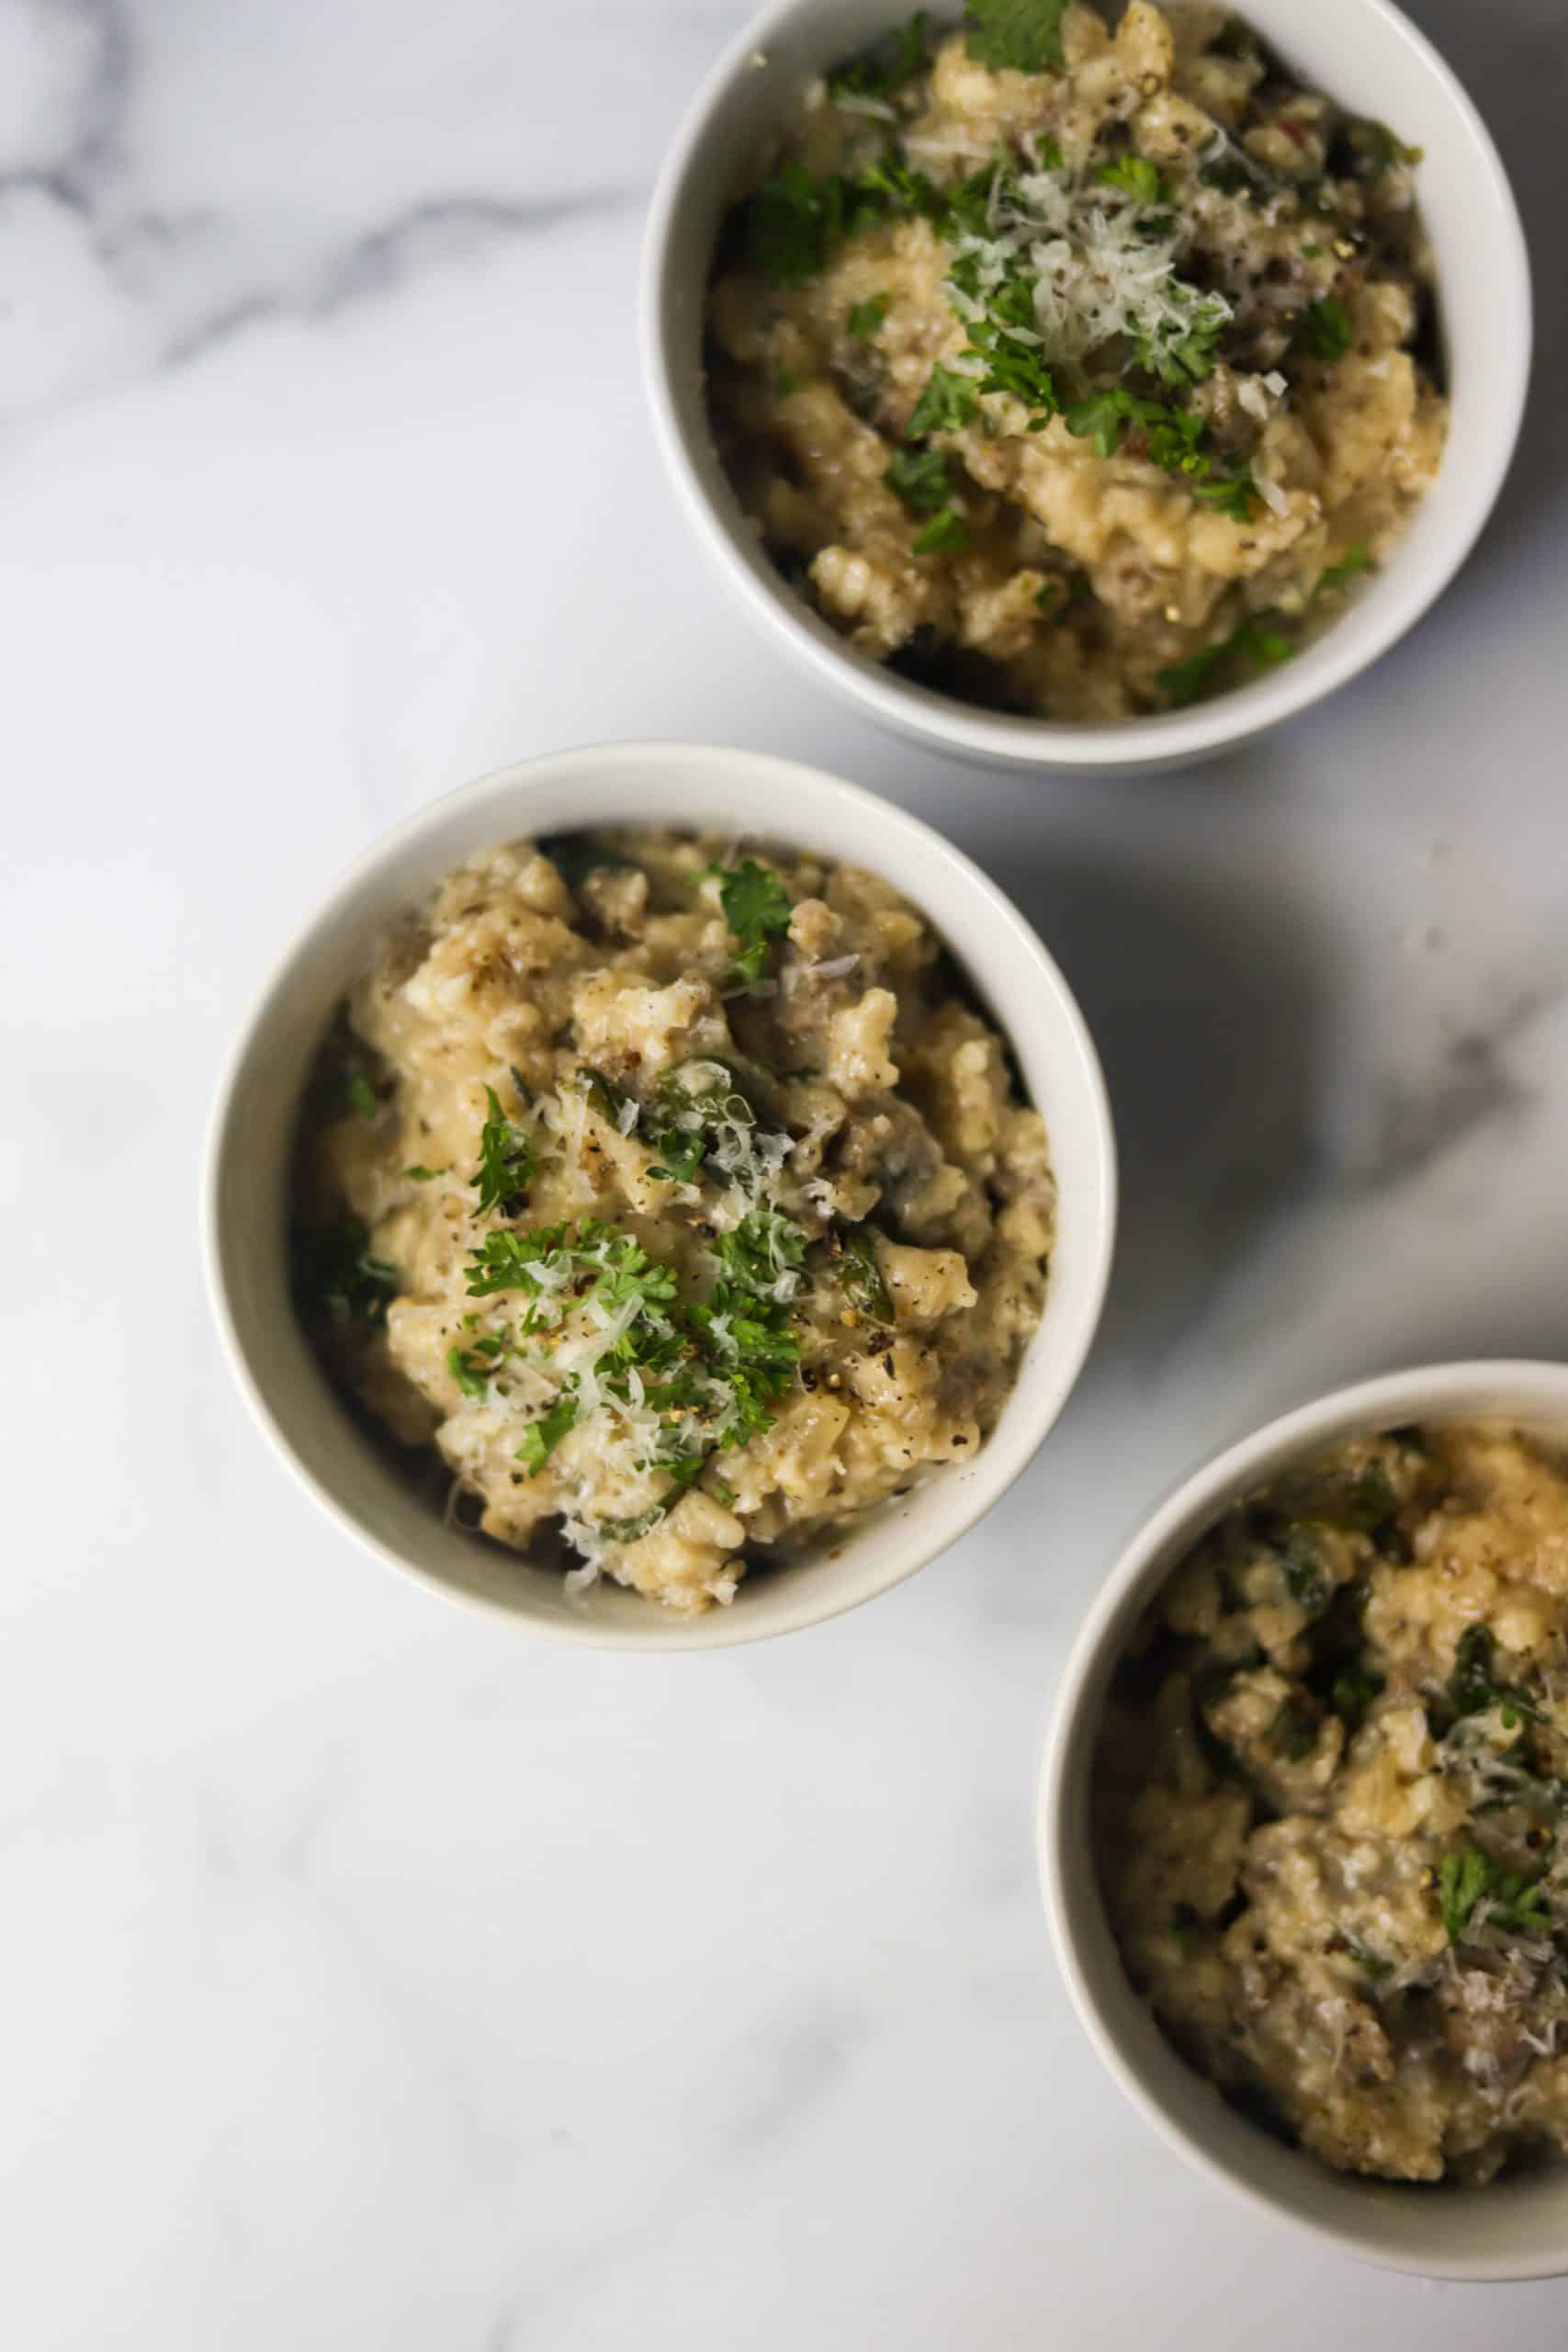 Three bowls of risotto on a marble backdrop.